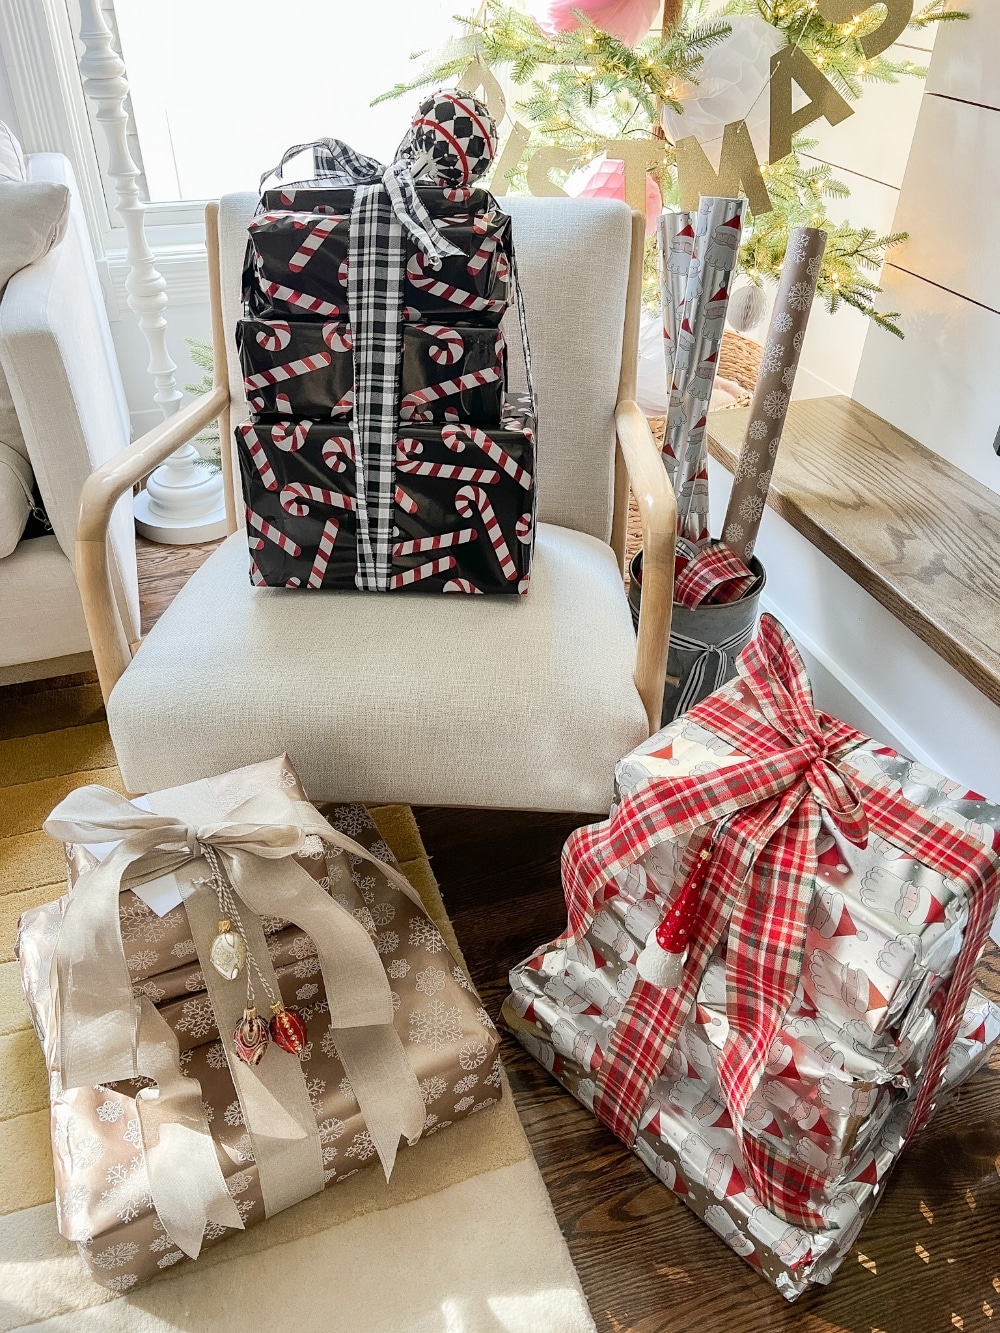 Holiday Gift Ideas for Sisters. Whether your sister is an adventurer or a homebody, these holiday gift ideas will delight your mom, sister or girlfriend! 